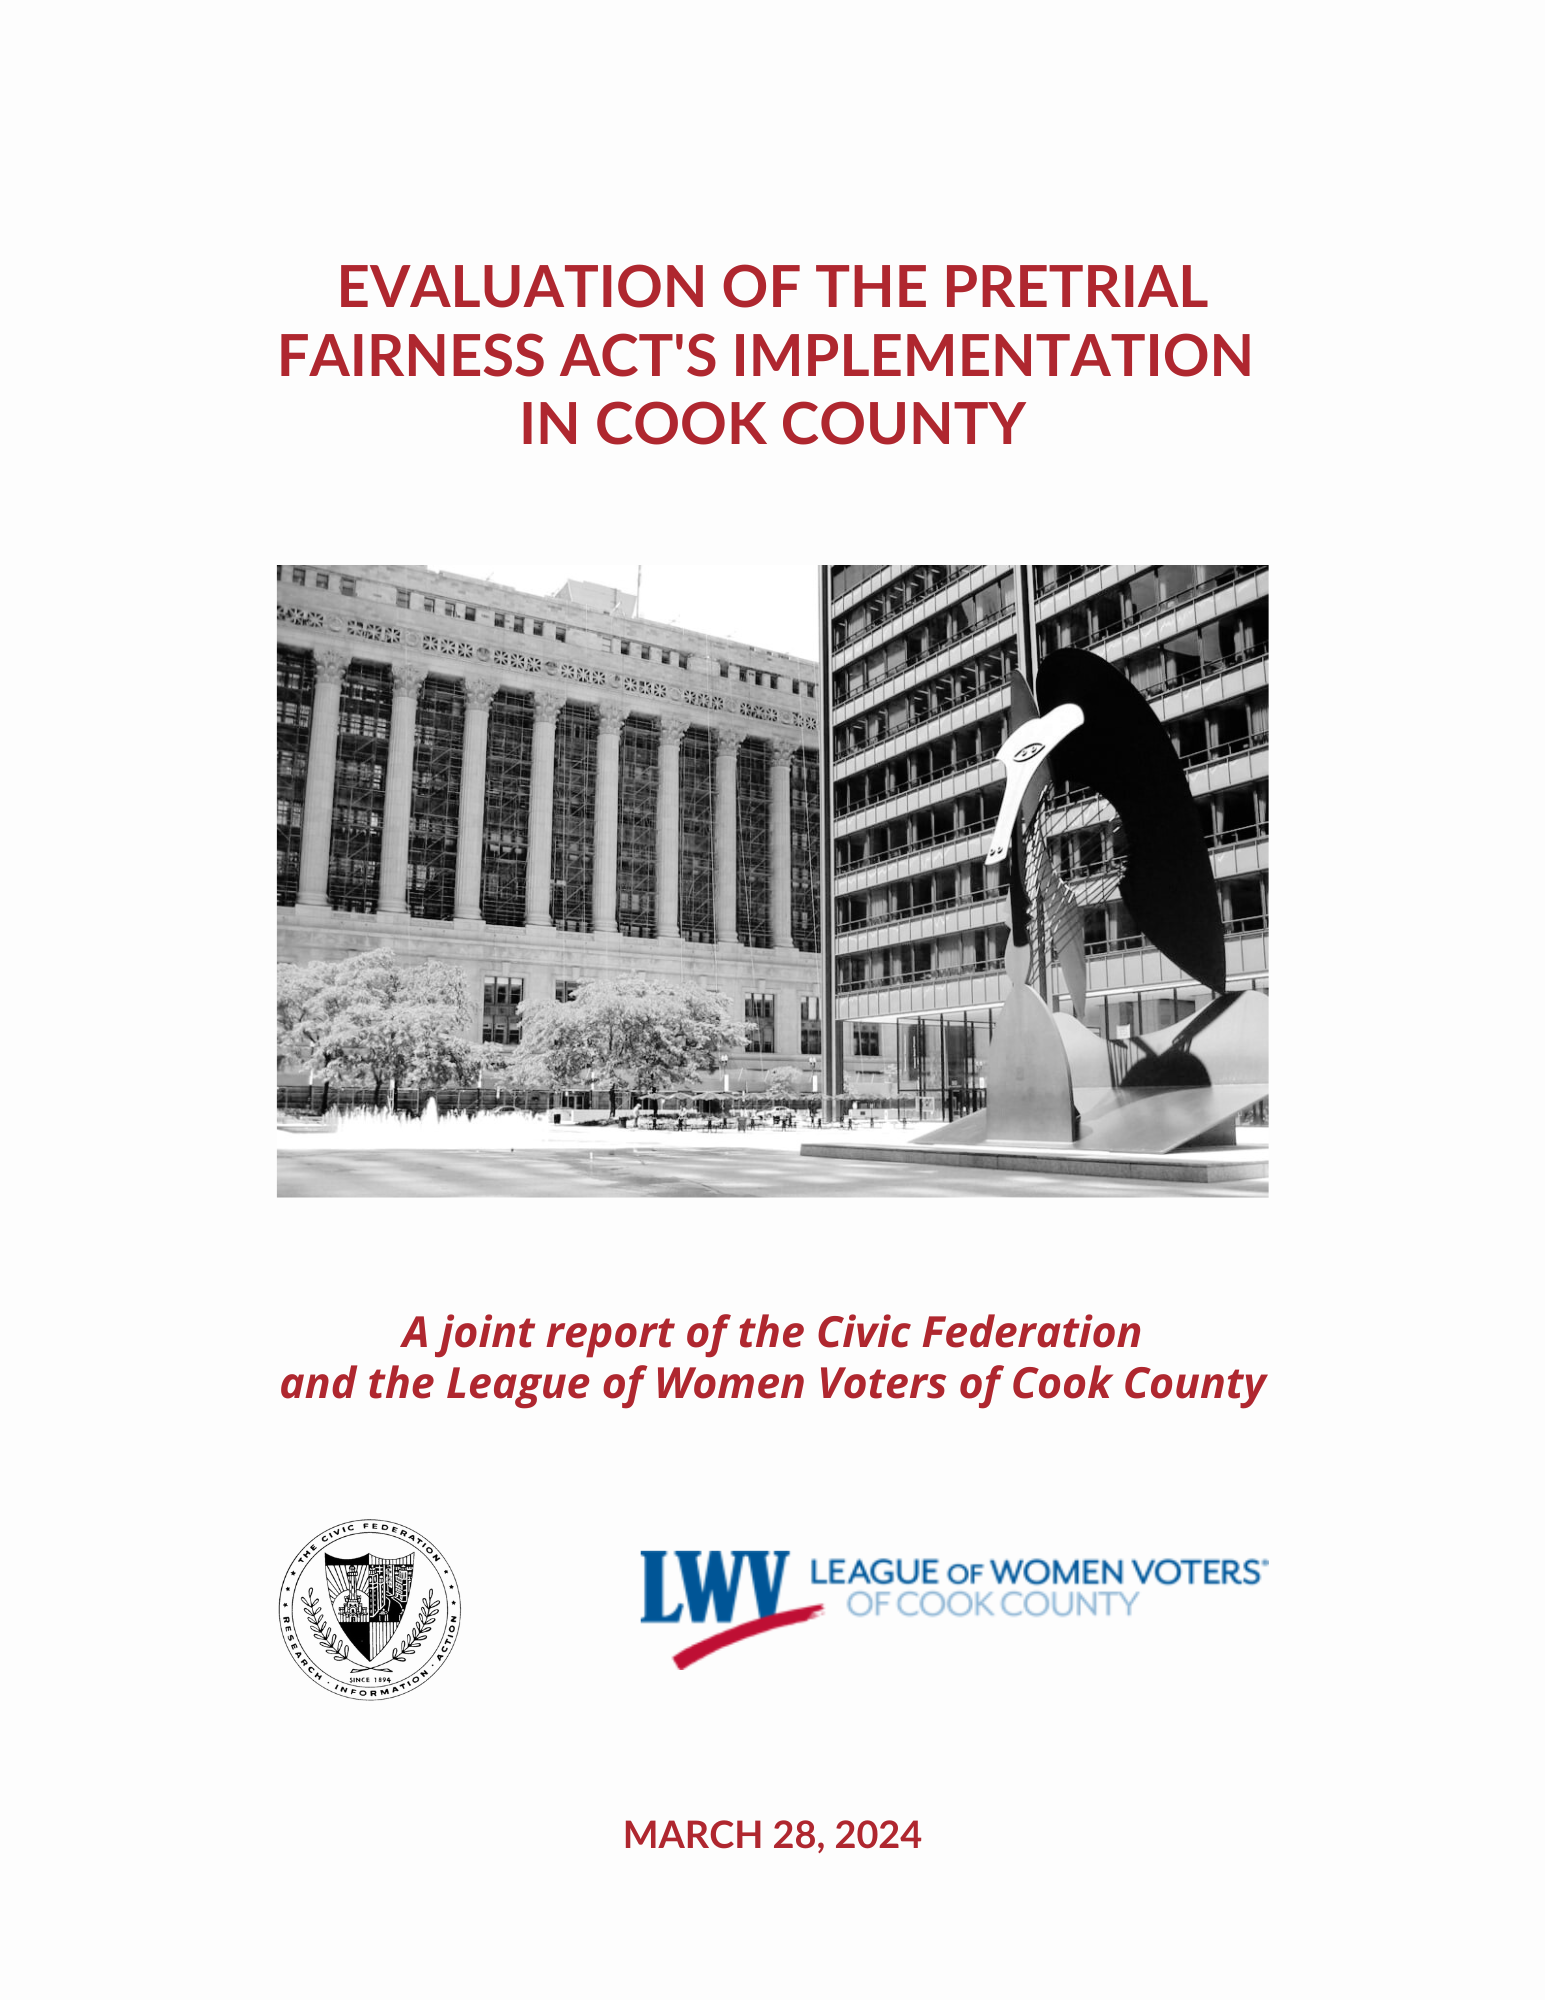 Evaluation of the Pretrial Fairness Act's Implementation in Cook County